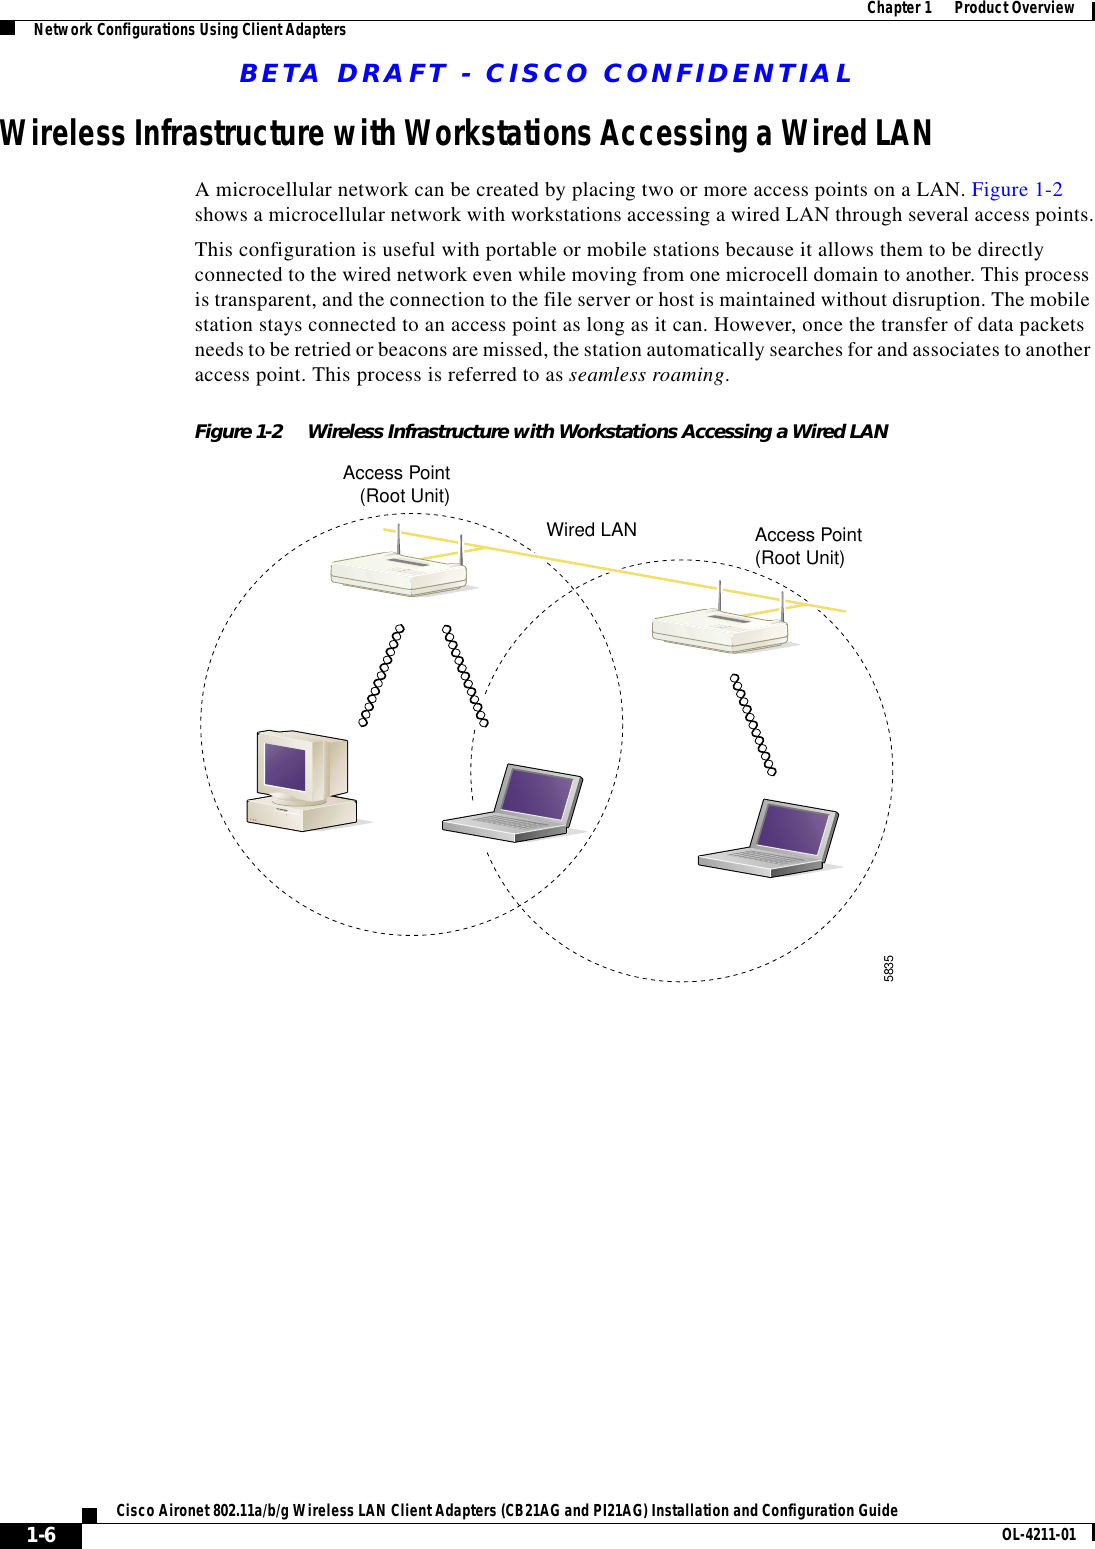 BETA DRAFT - CISCO CONFIDENTIAL1-6Cisco Aironet 802.11a/b/g Wireless LAN Client Adapters (CB21AG and PI21AG) Installation and Configuration Guide OL-4211-01Chapter 1      Product OverviewNetwork Configurations Using Client AdaptersWireless Infrastructure with Workstations Accessing a Wired LANA microcellular network can be created by placing two or more access points on a LAN. Figure 1-2 shows a microcellular network with workstations accessing a wired LAN through several access points.This configuration is useful with portable or mobile stations because it allows them to be directly connected to the wired network even while moving from one microcell domain to another. This process is transparent, and the connection to the file server or host is maintained without disruption. The mobile station stays connected to an access point as long as it can. However, once the transfer of data packets needs to be retried or beacons are missed, the station automatically searches for and associates to another access point. This process is referred to as seamless roaming.Figure 1-2 Wireless Infrastructure with Workstations Accessing a Wired LANAccess Point(Root Unit)Access Point(Root Unit)5835Wired LAN